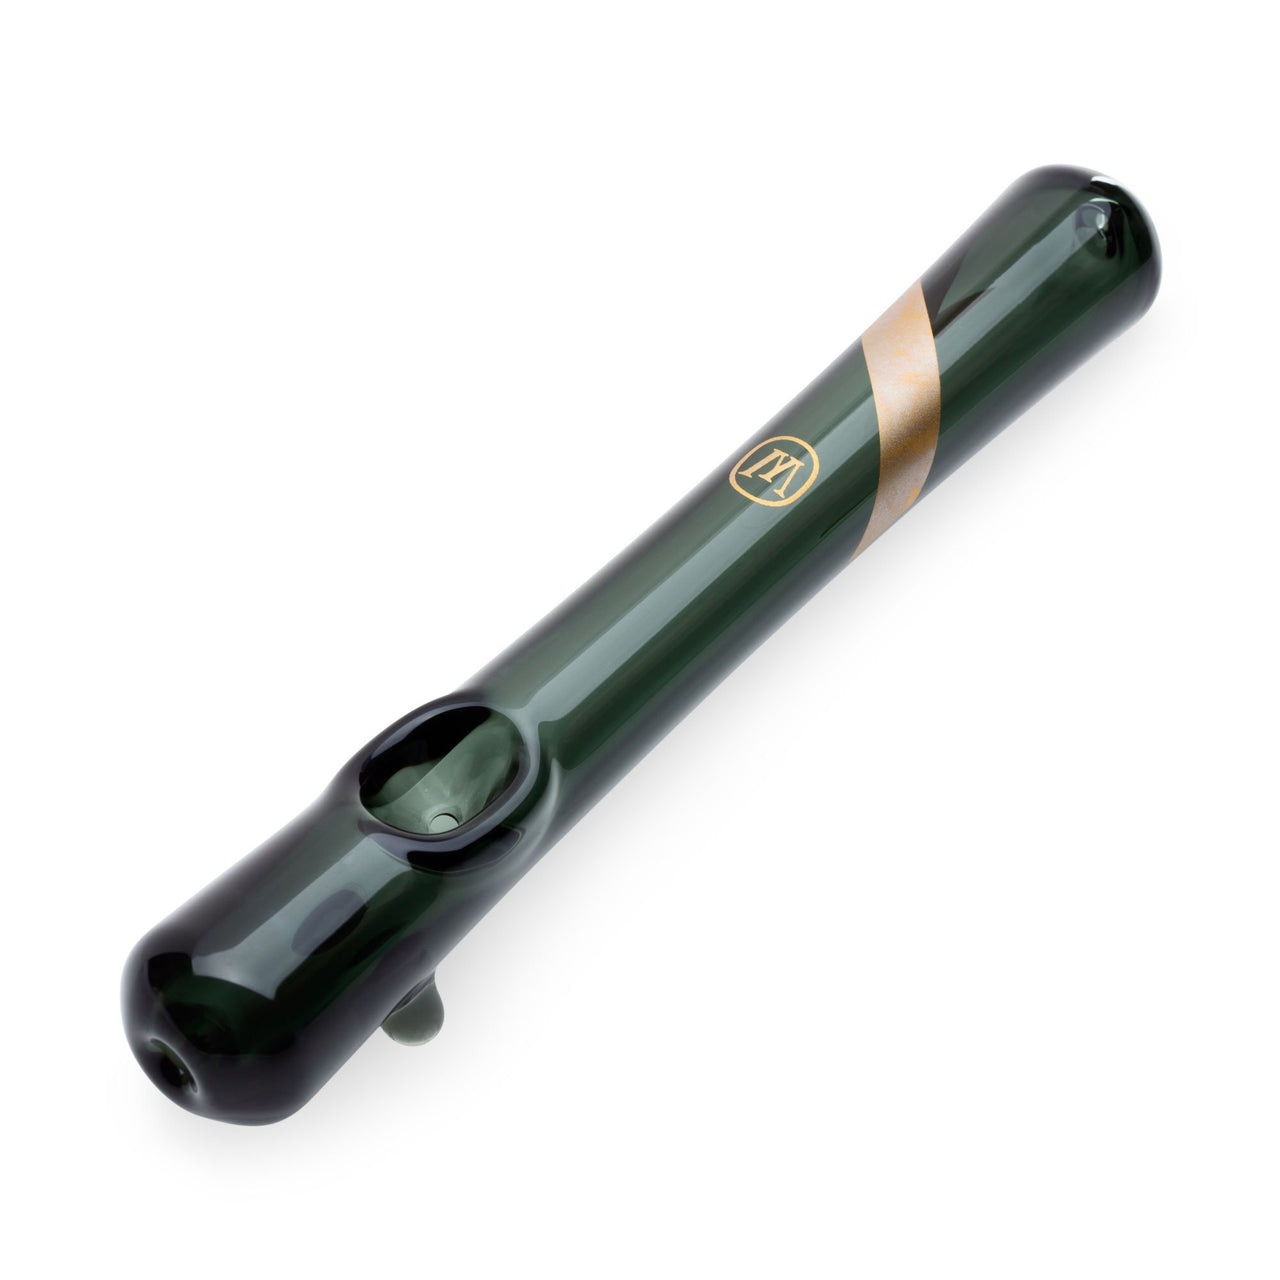 Marley Natural Smoked Glass Steamroller Pipe